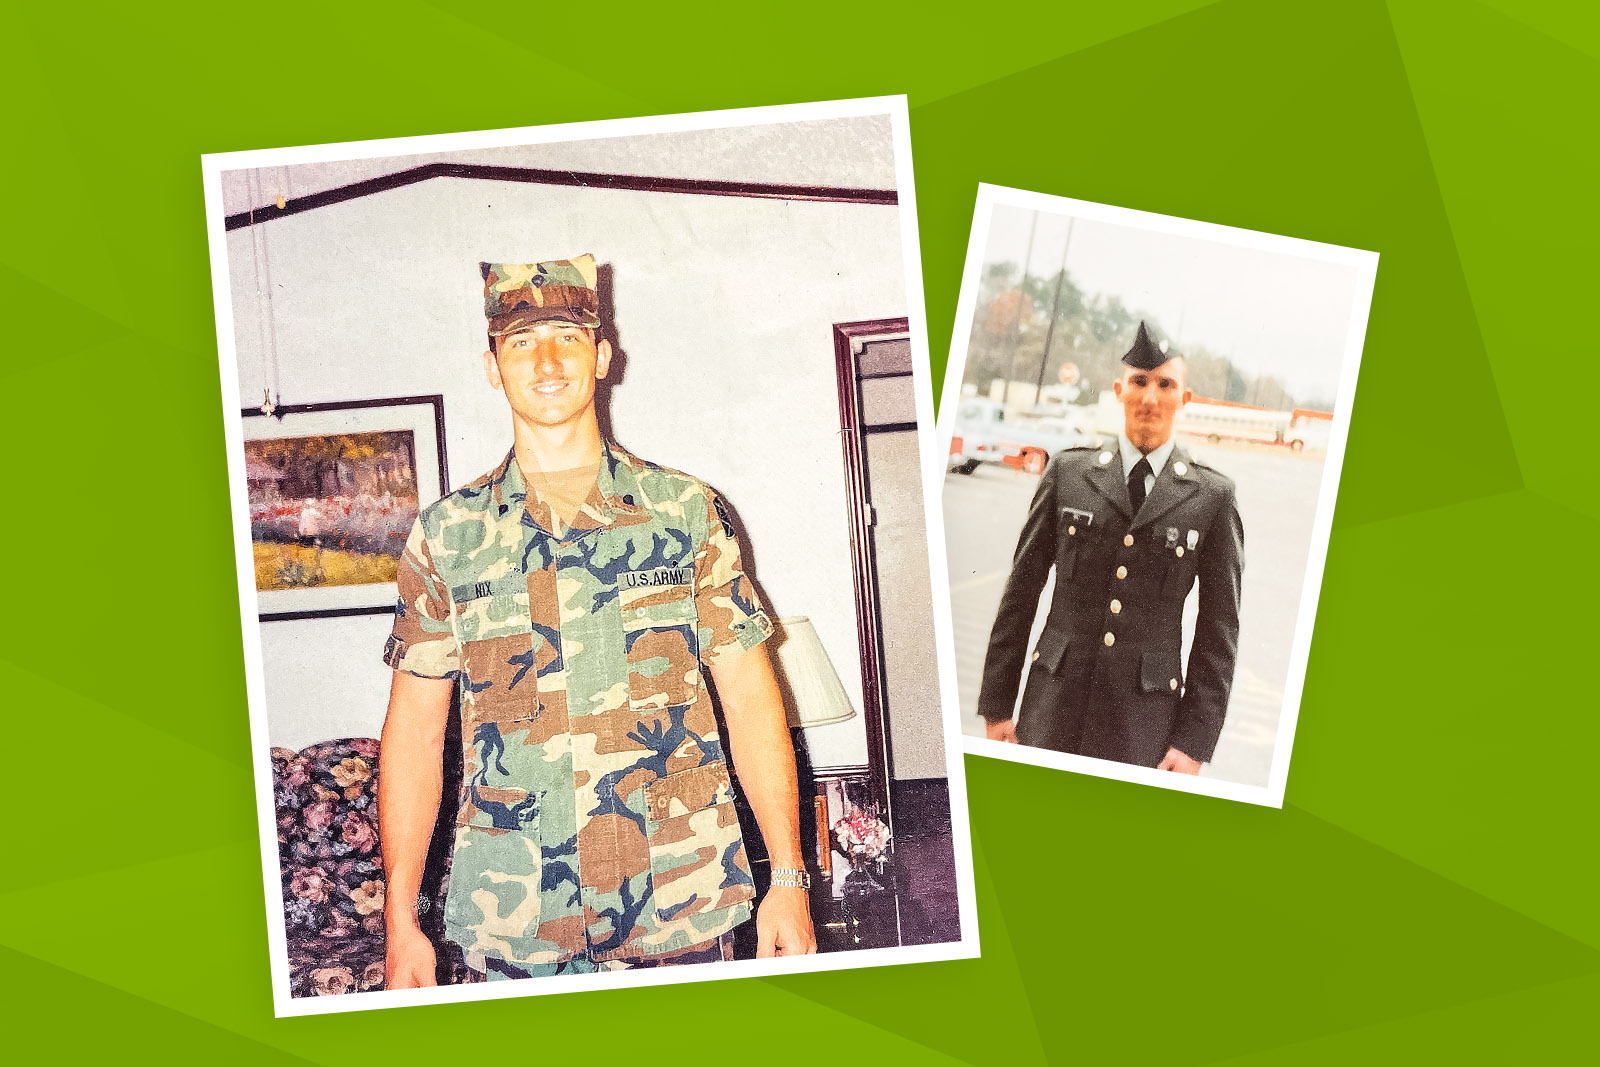 Photos of a soldier in uniform